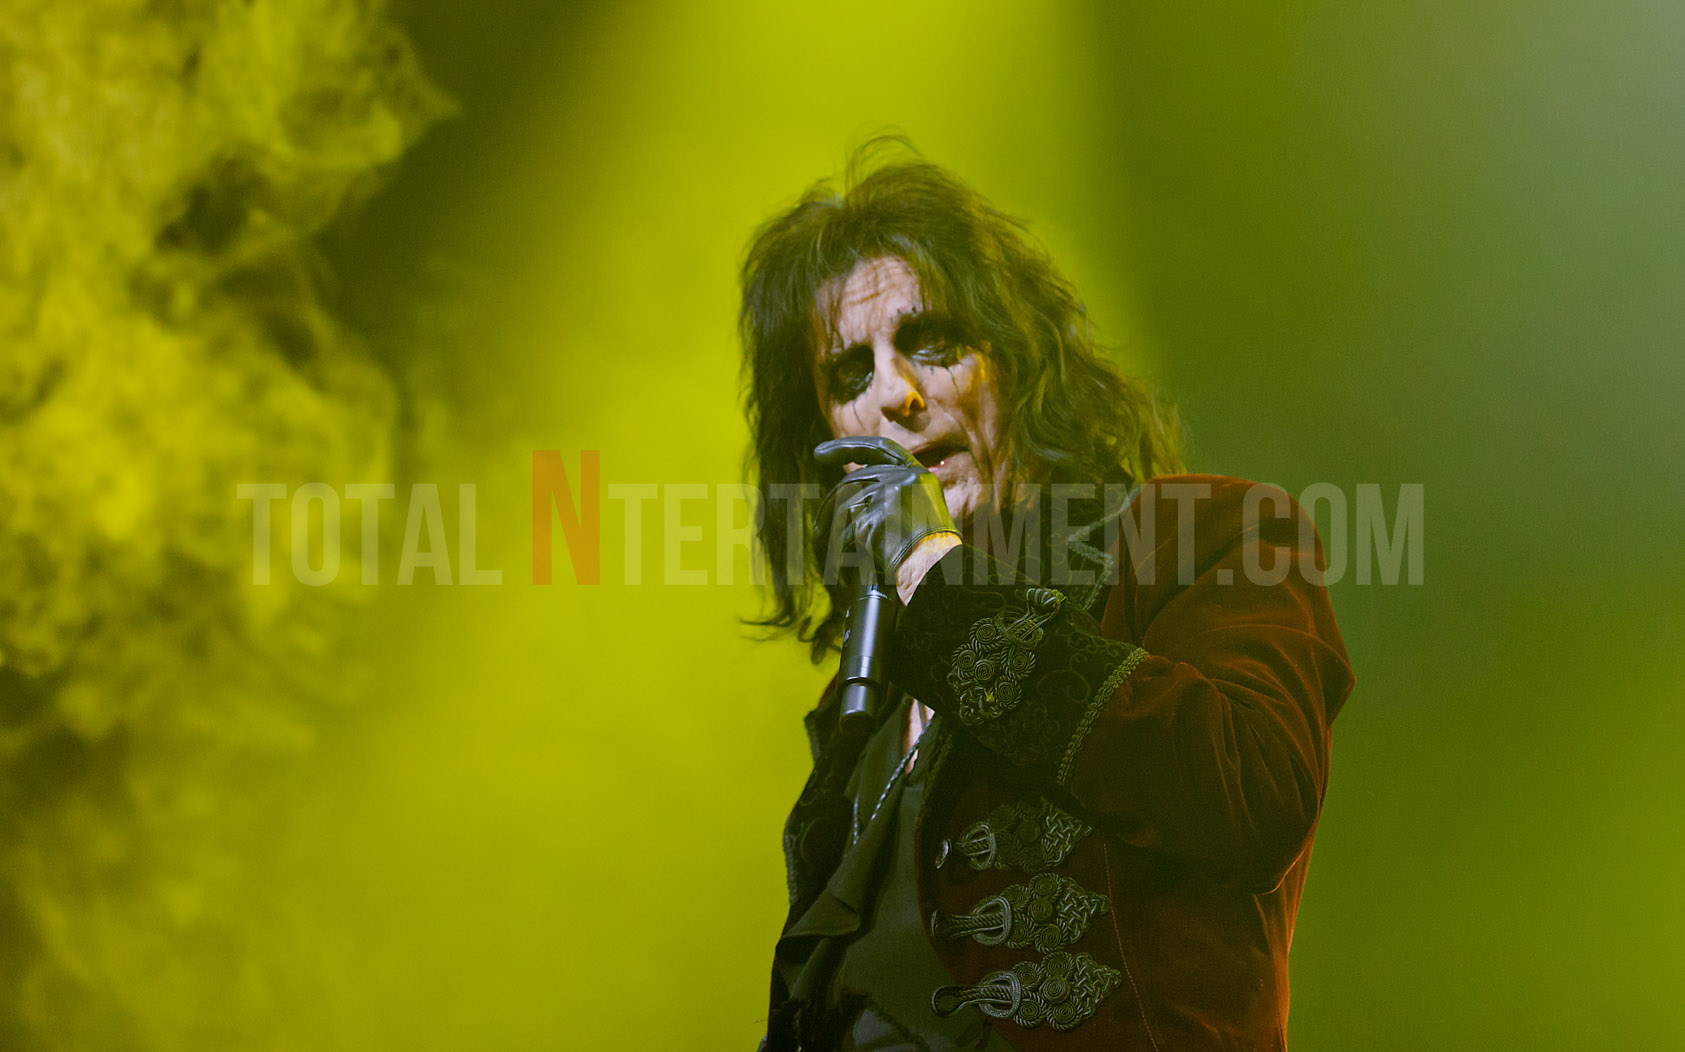 Alice Cooper kicks off the UK leg of his Paranormal tour at the First Direct Arena in Leeds